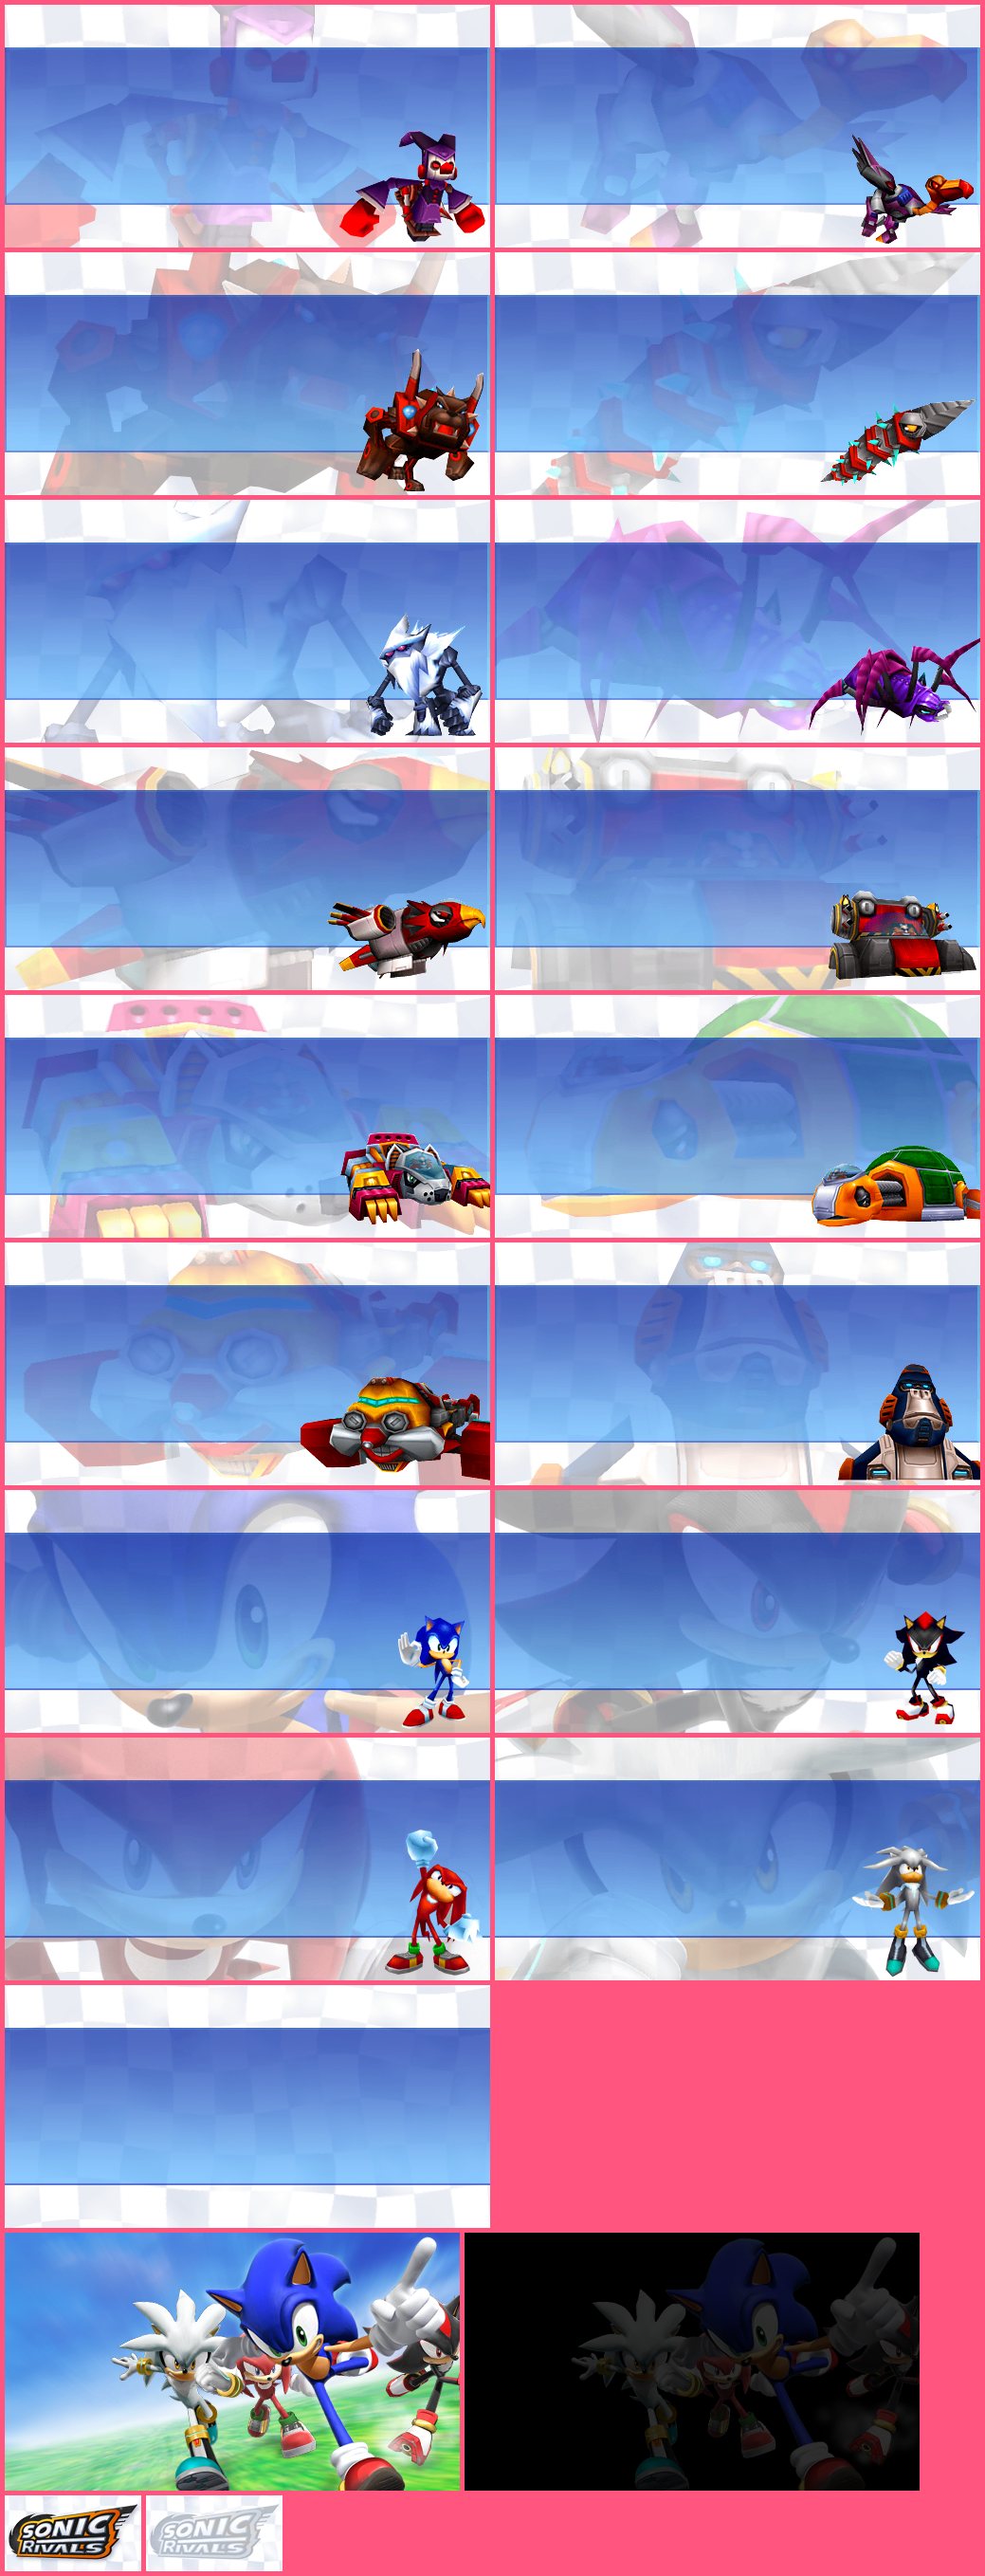 Sonic Rivals - Screens and Banners